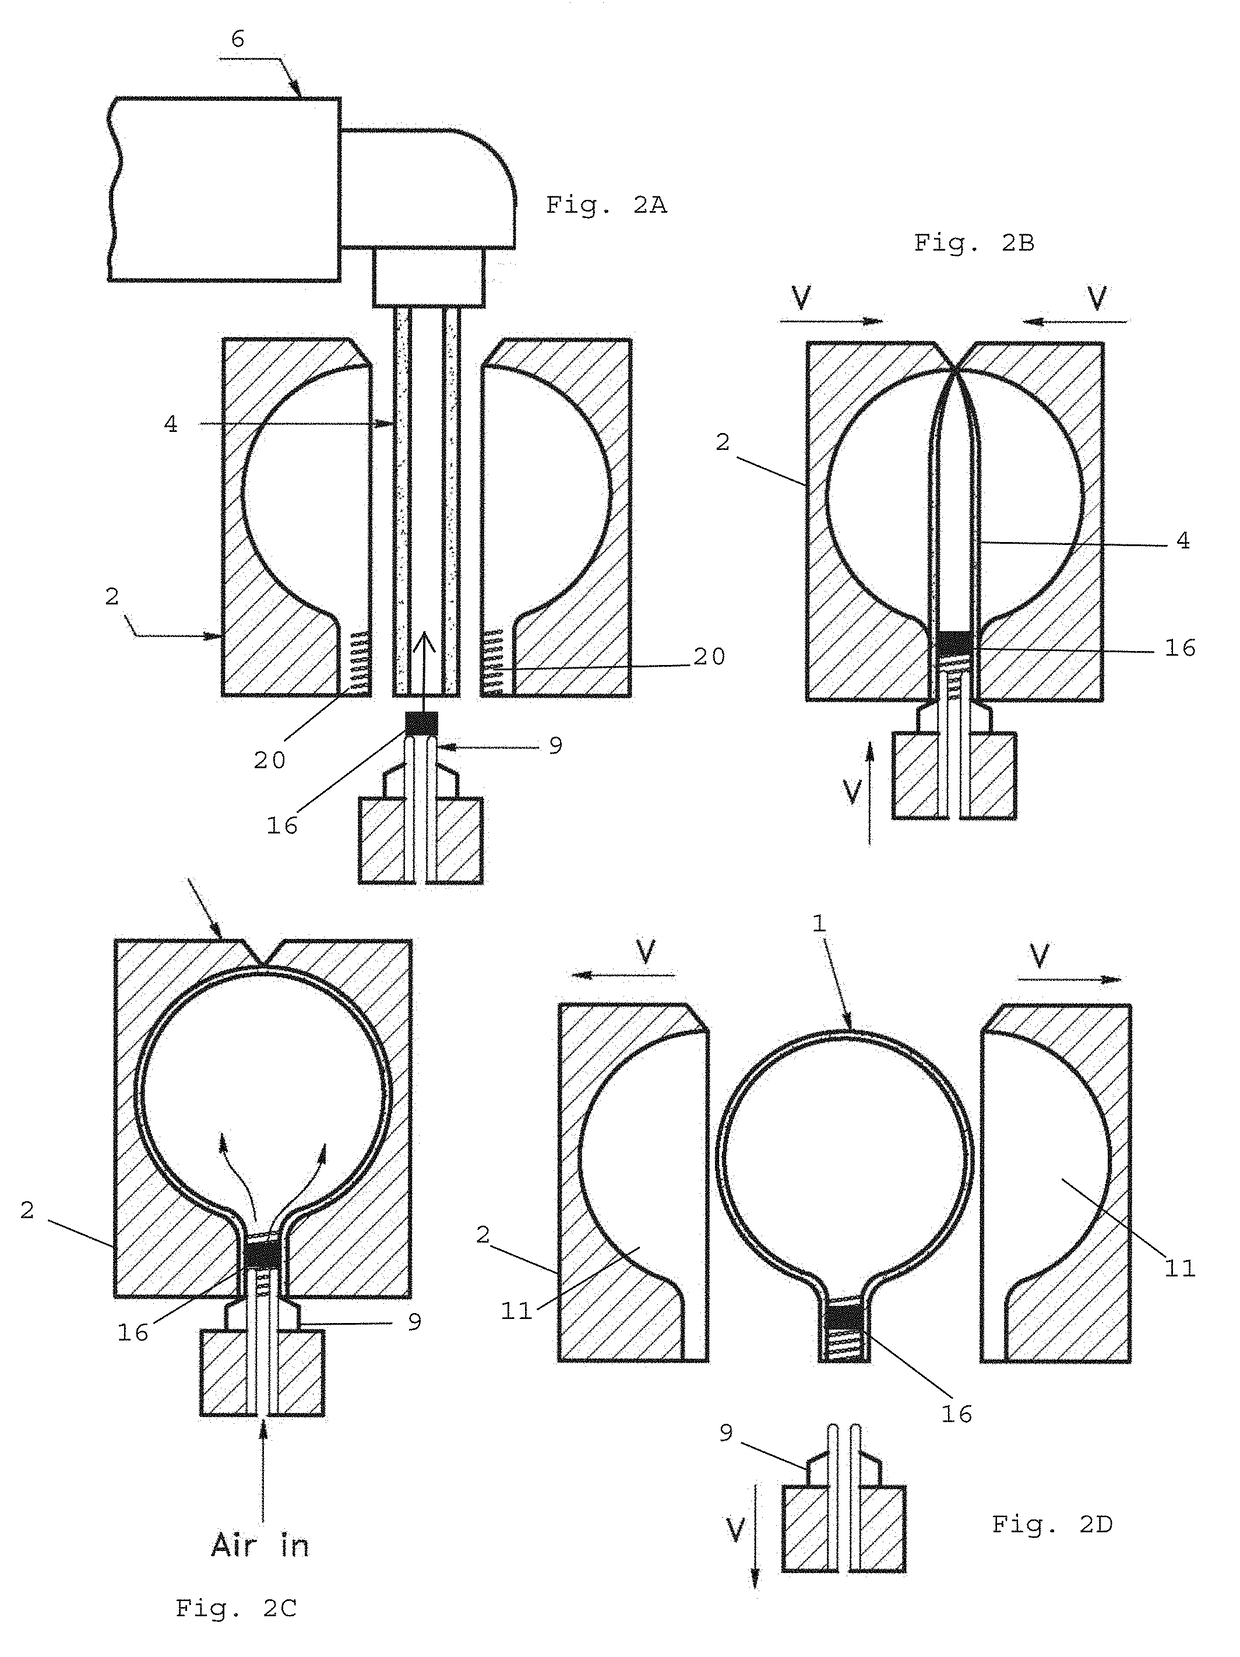 Method of manufacturing a helium-free balloon